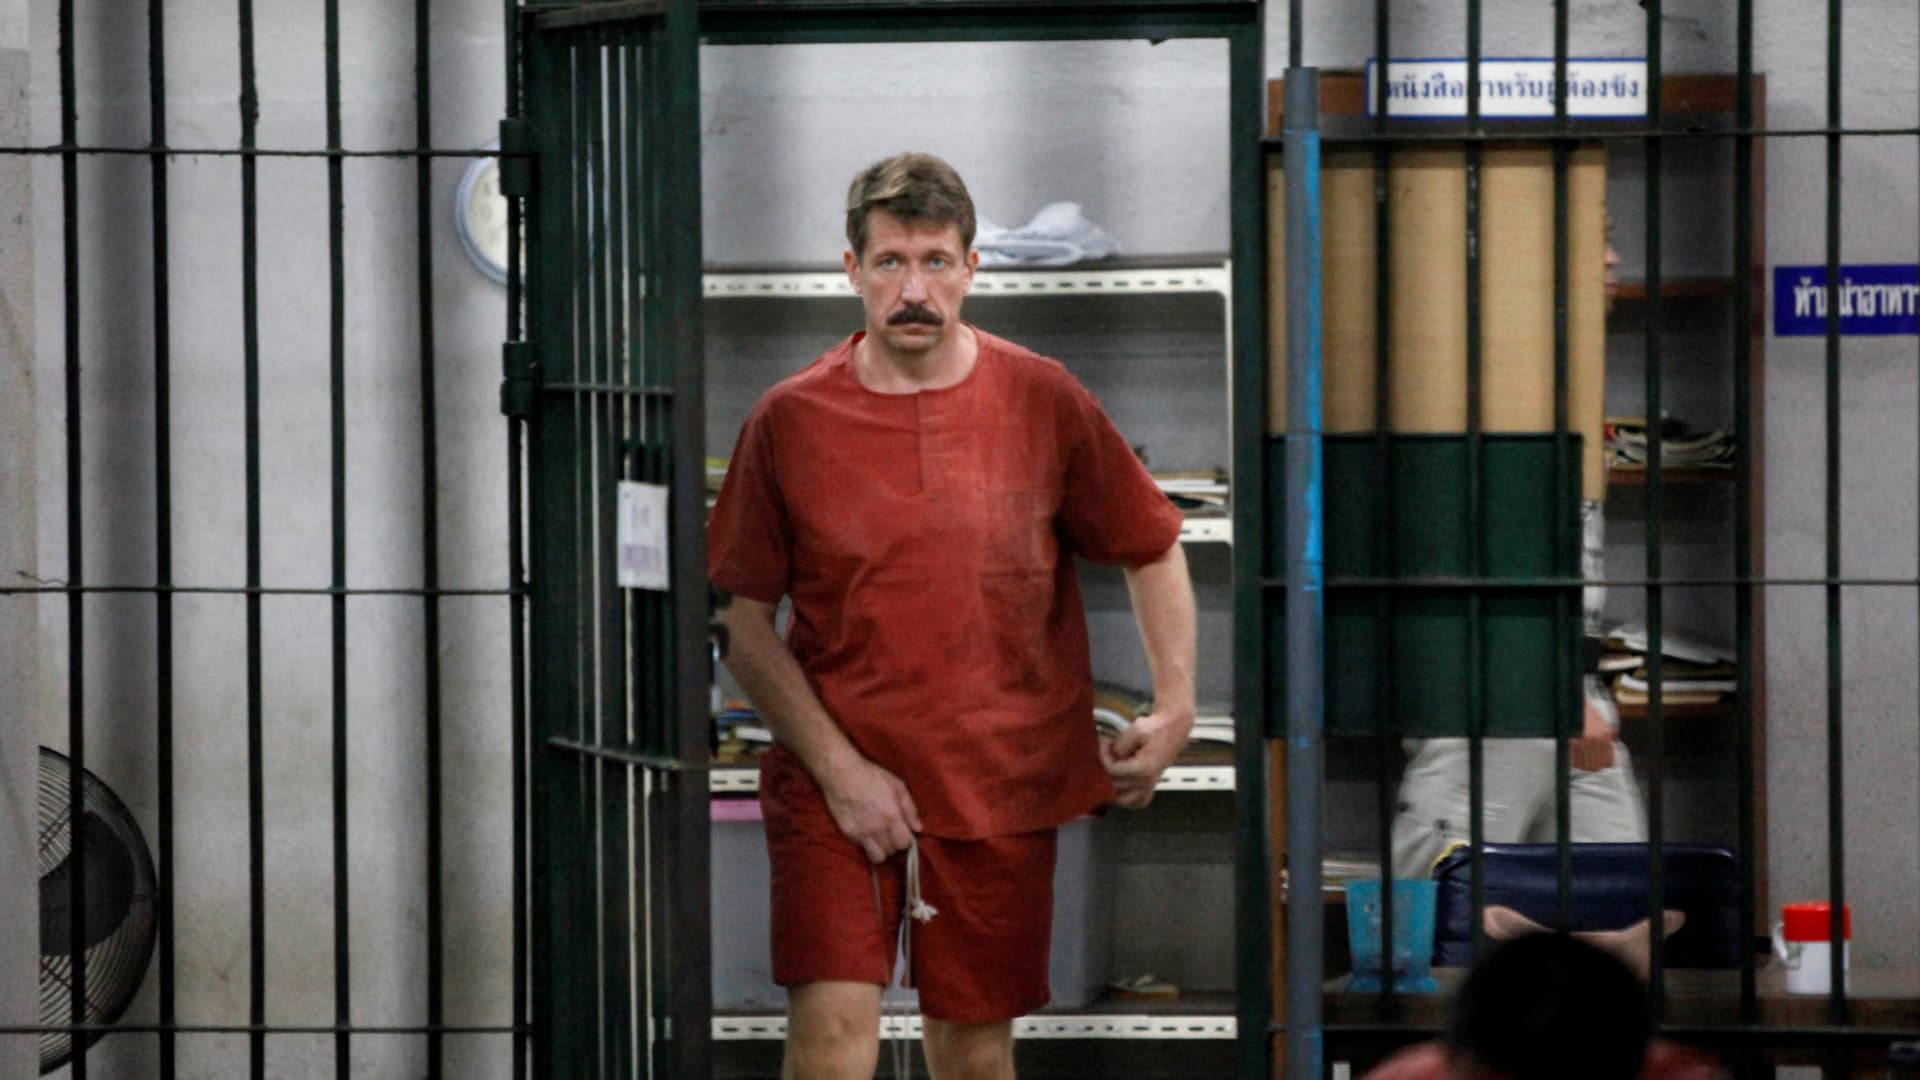 FILE PHOTO: Suspected Russian arms dealer Viktor Bout arrives at a courthouse in Bangkok February 16, 2010. Bout arrived at a Bangkok criminal court for a pre-trial meeting following the rejection of a U.S. request last August for his extradition. The case is now with the appeal court and Bout has been denied bail. 